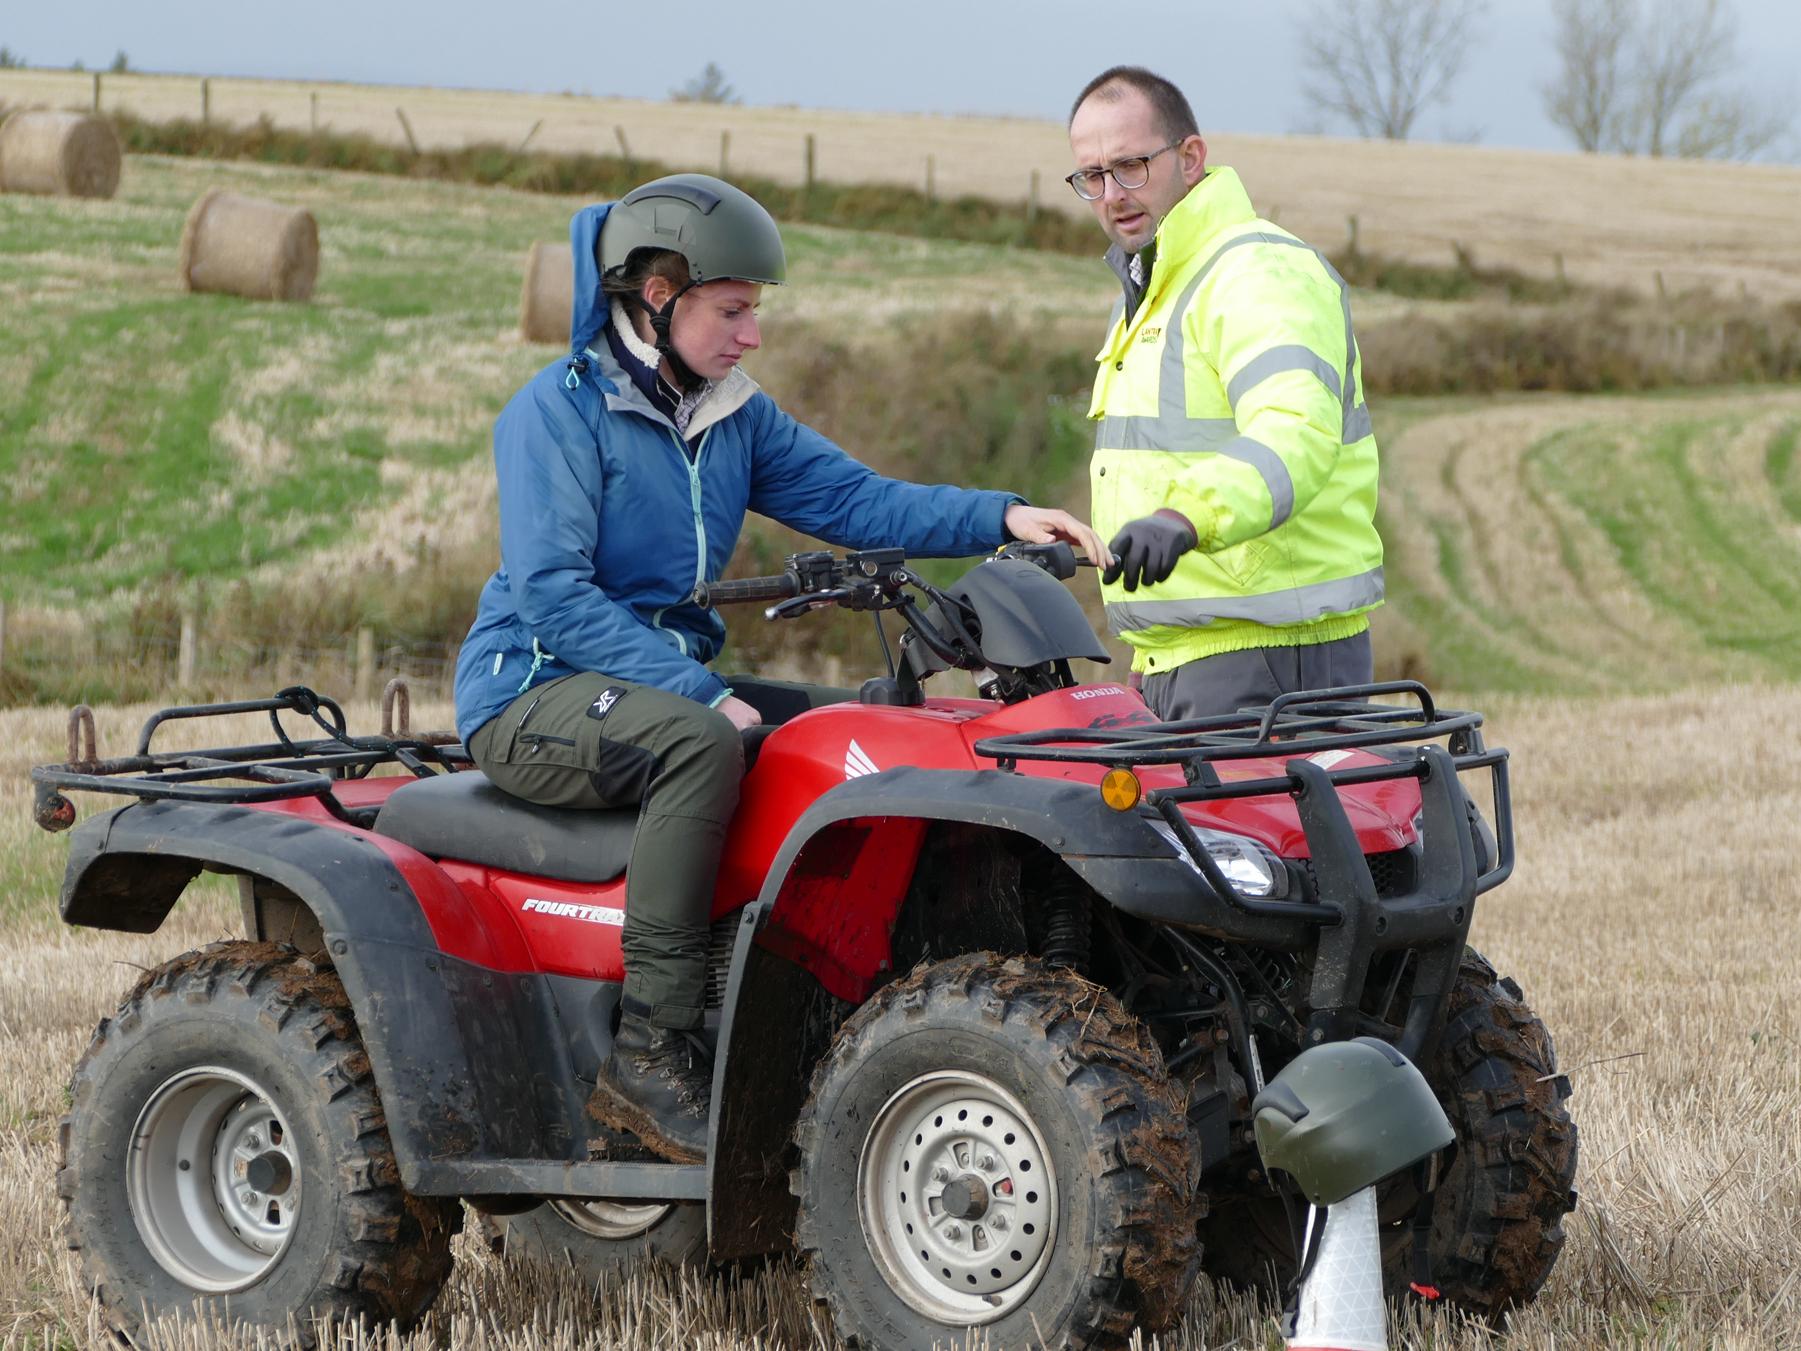 Woman using a quad bike with male instructor